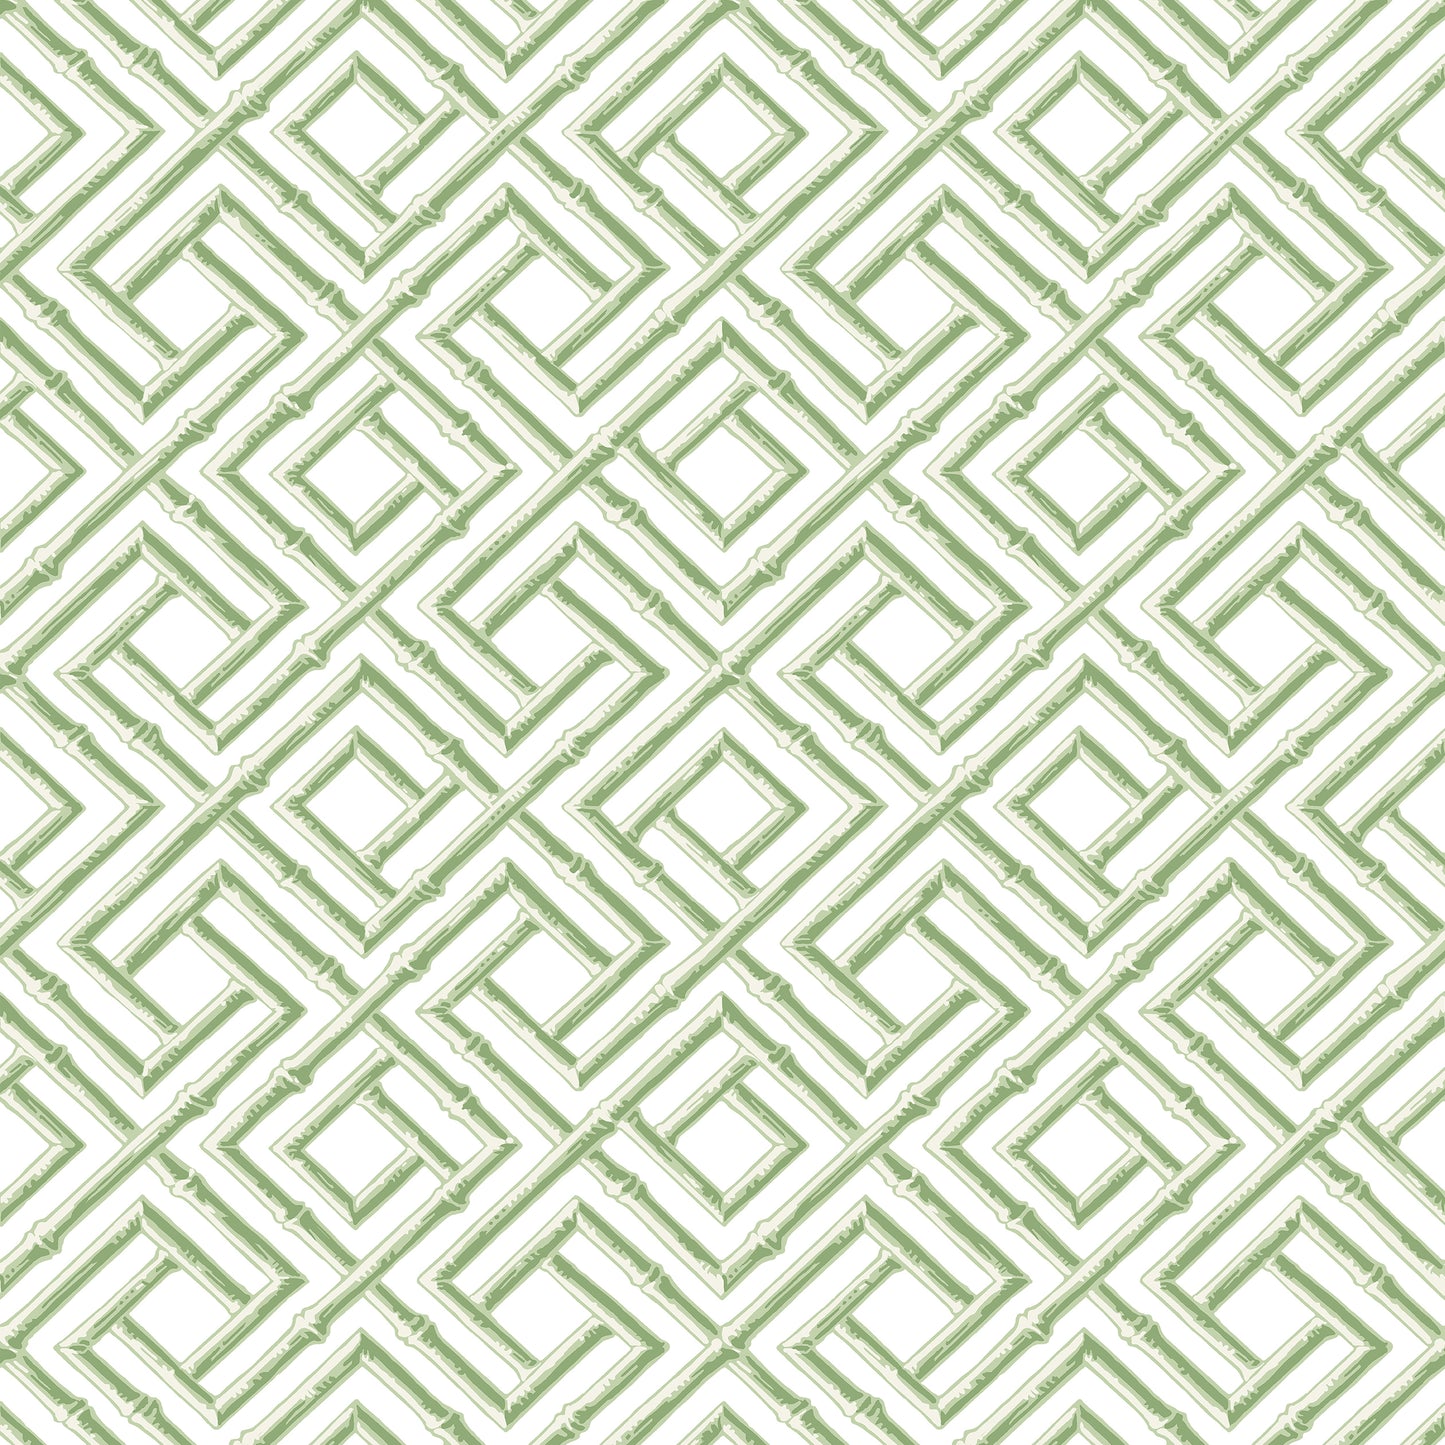 Purchase Thibaut Wallpaper Item# T42049 pattern name French Lattice color Green. 